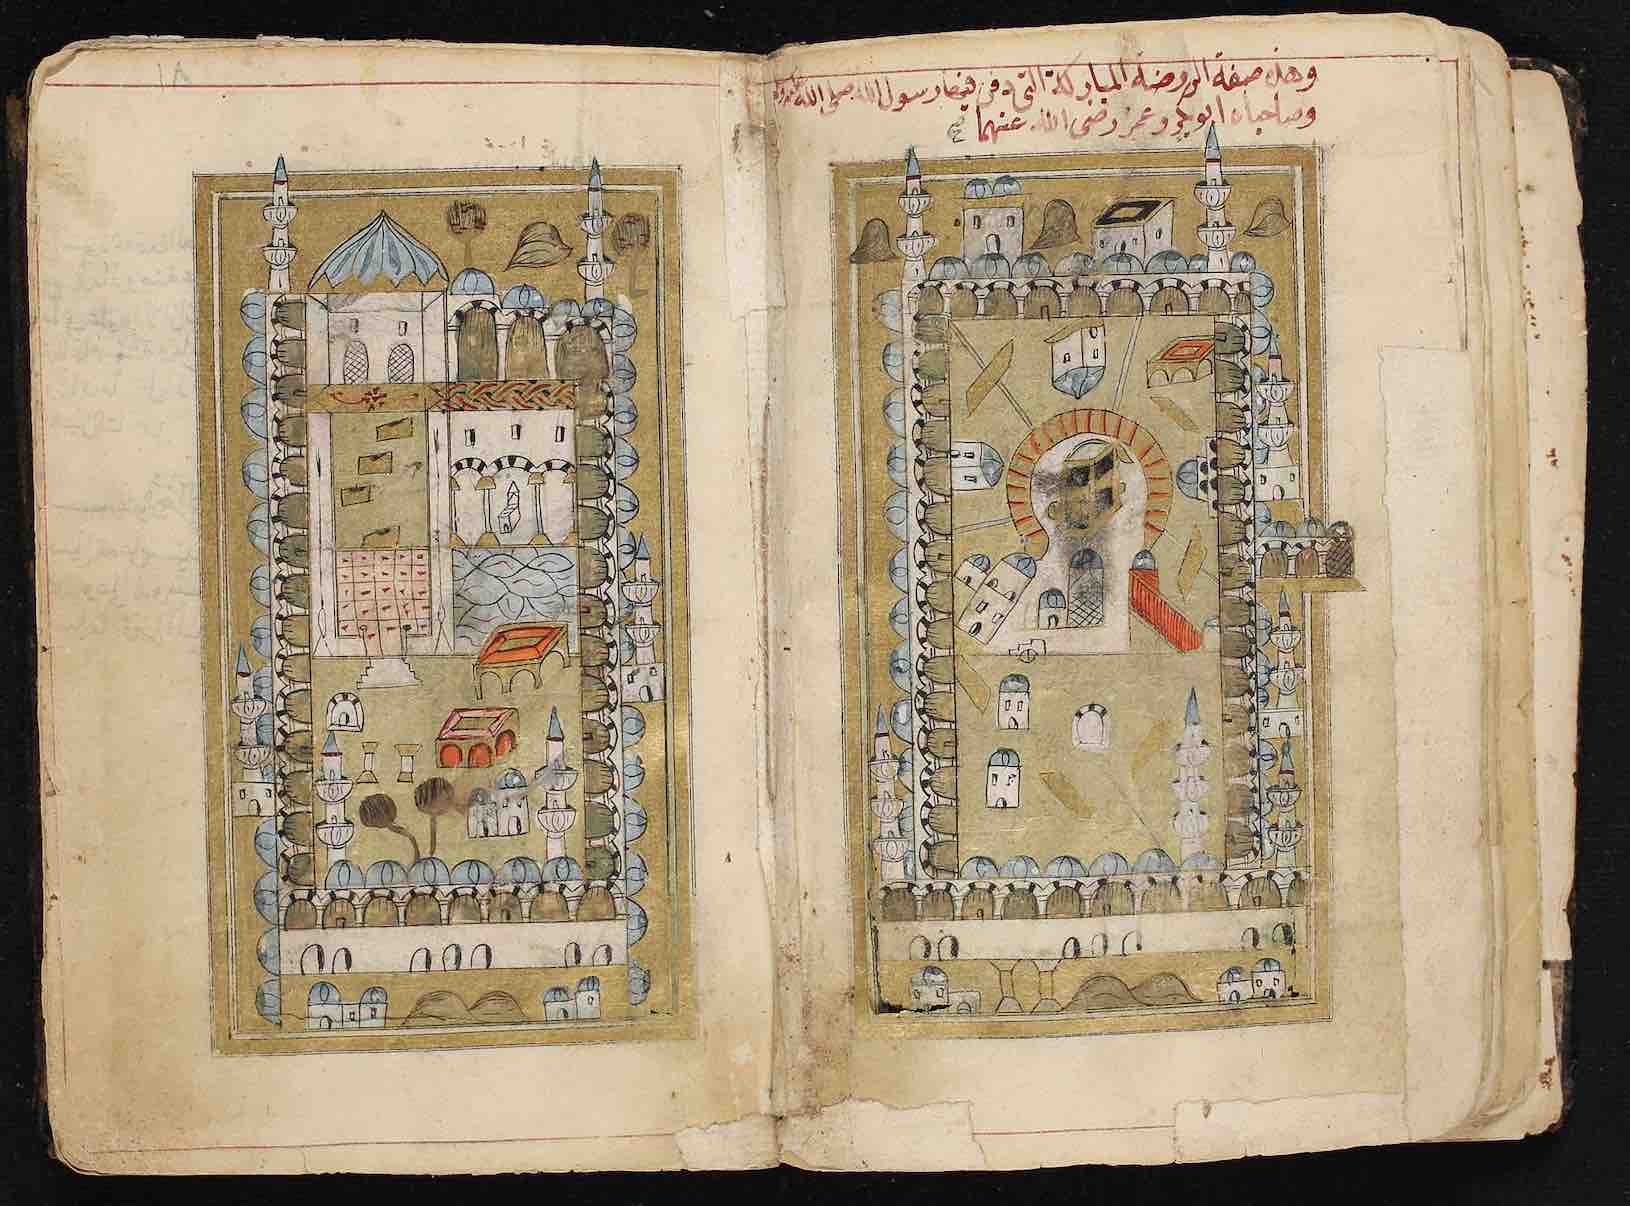 Illustrations of Medina and Mecca in Dalāʼil al-khayrāt—the Prayers for the Prophet—part of the Issaf Nashashibi Library, Jerusalem. (<a href='https://w3id.org/vhmml/readingRoom/view/139449'>DINL 356 143</a>)